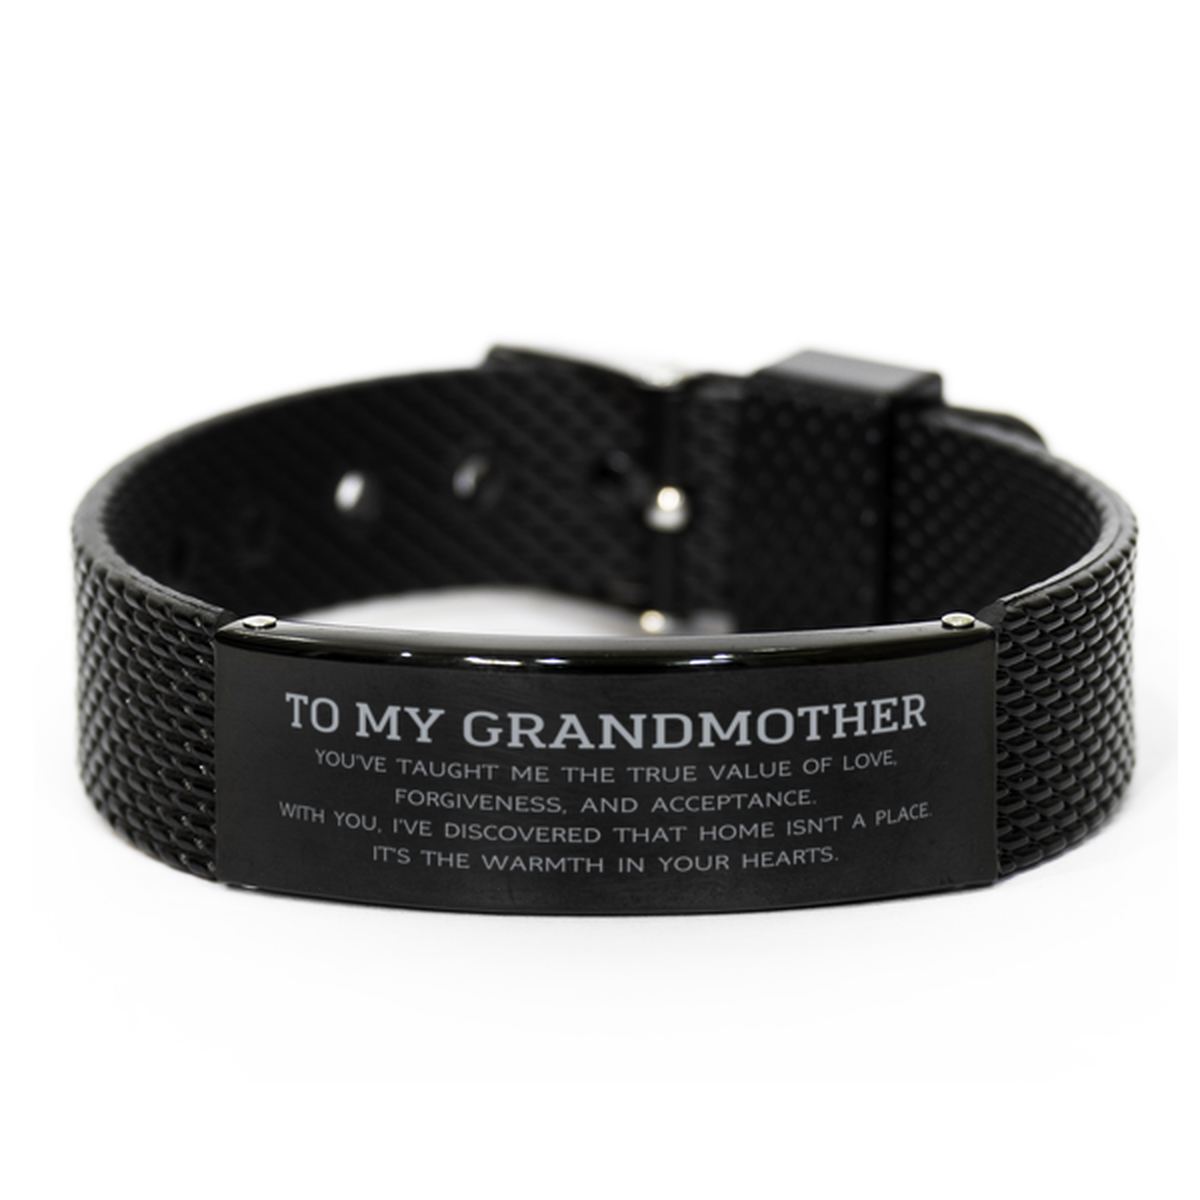 To My Grandmother Gifts, You've taught me the true value of love, Thank You Gifts For Grandmother, Birthday Black Shark Mesh Bracelet For Grandmother